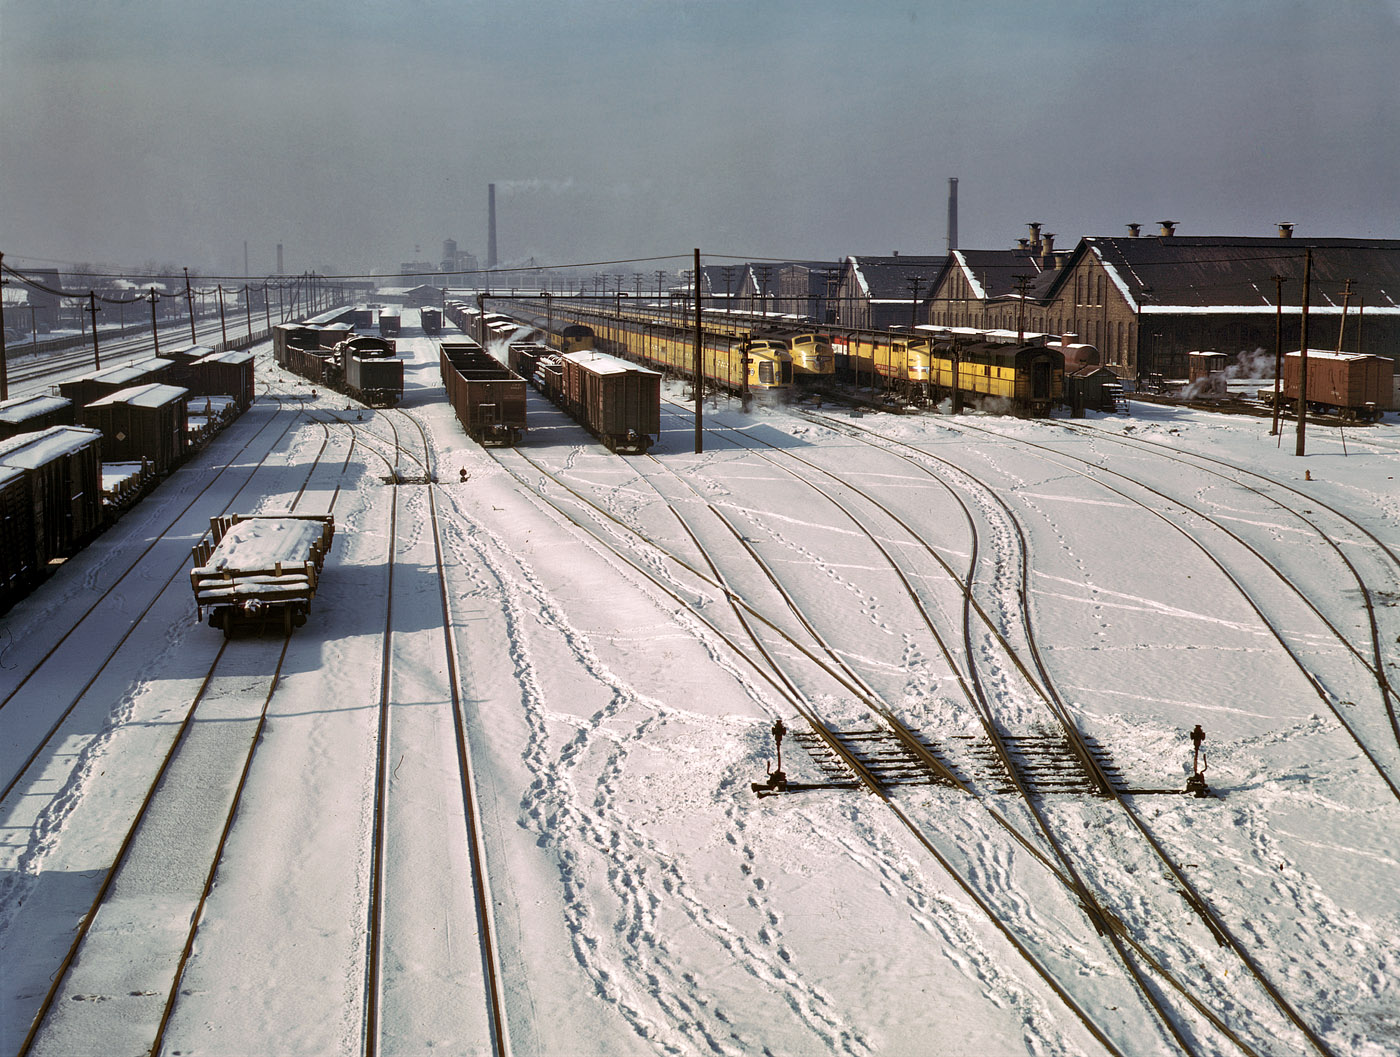 December 1942. Three West Coast streamliners in the Chicago & North Western yards at Chicago. View full size. 4x5 Kodachrome transparency by Jack Delano.